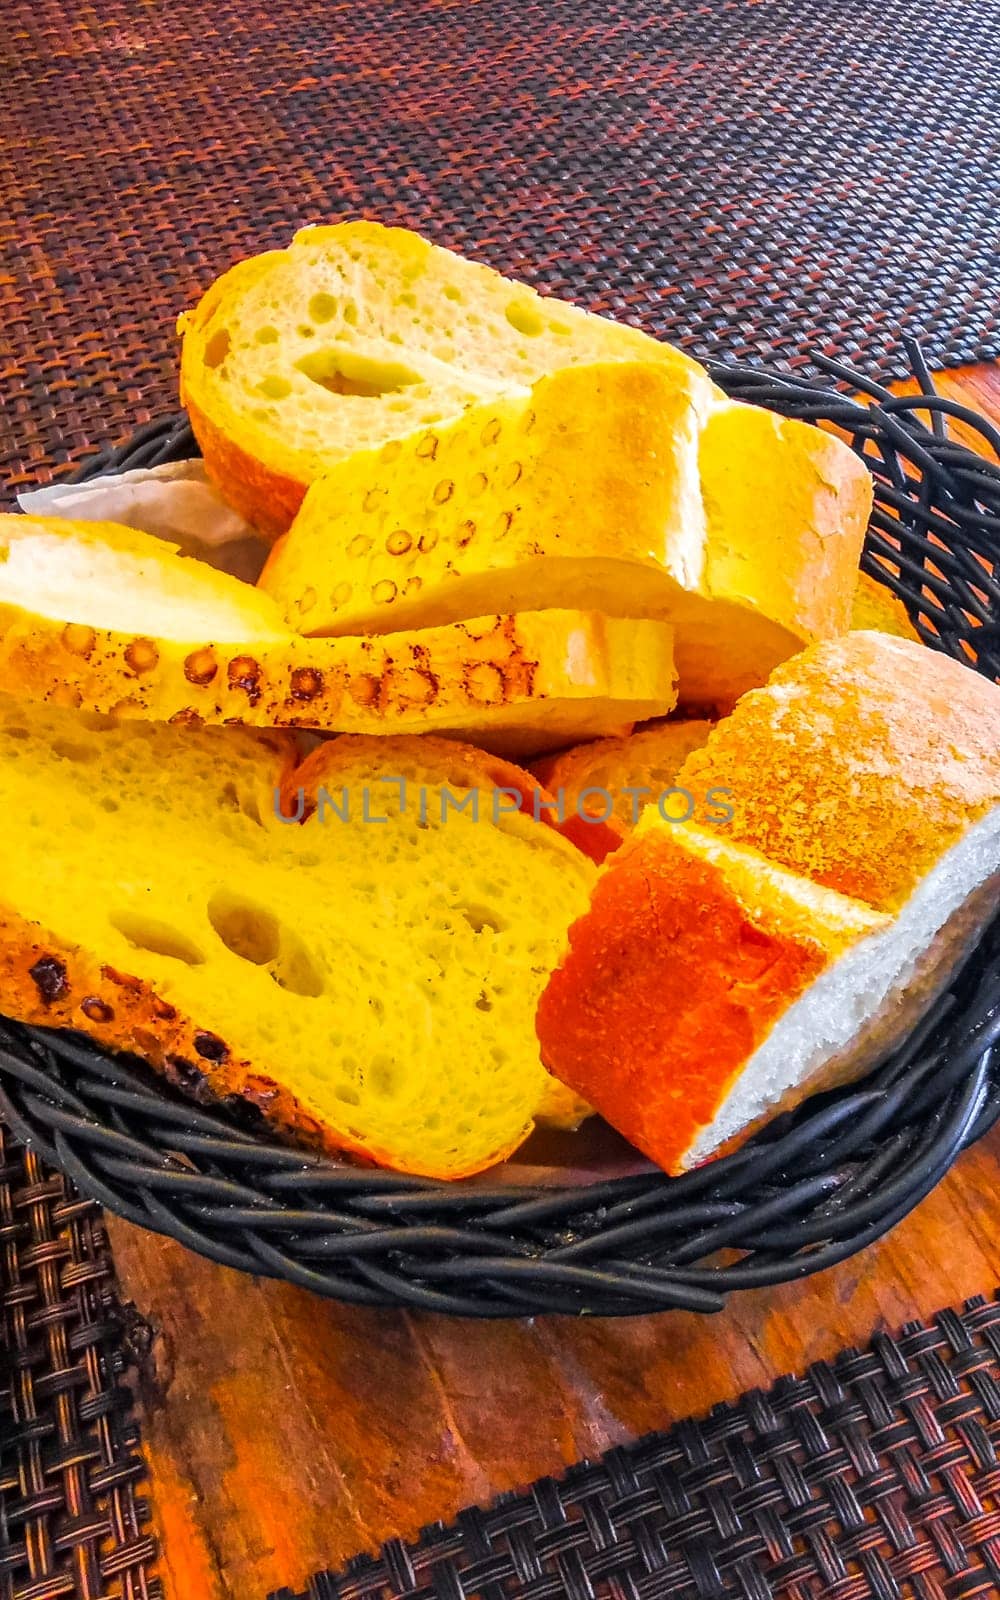 Bread in basket on wooden table dish meal food and drink in the restaurant PapaCharly Papa Charly in Playa del Carmen Quintana Roo Mexico.